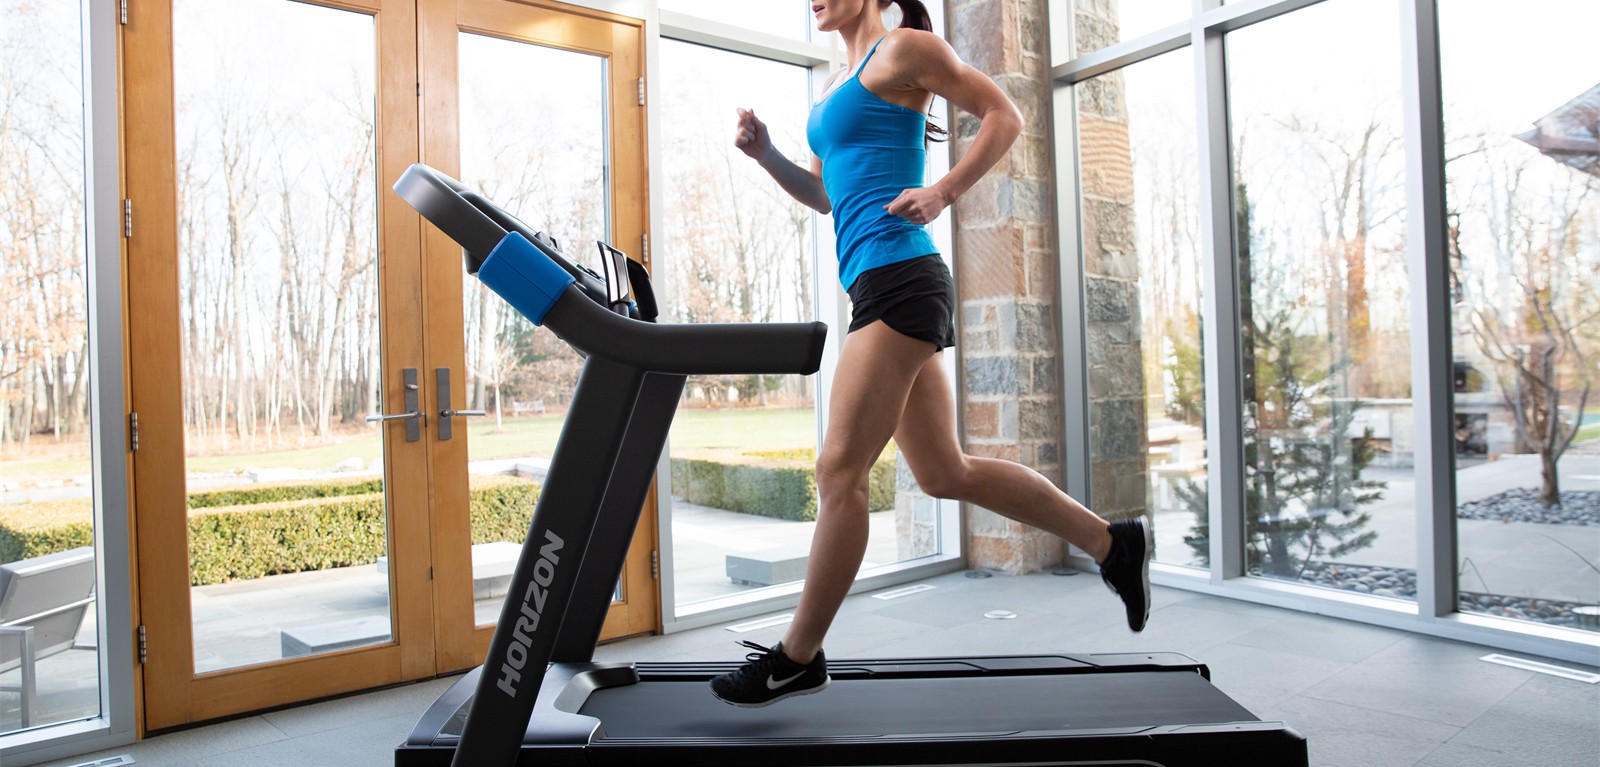 Exercises You Can Do on a Treadmill